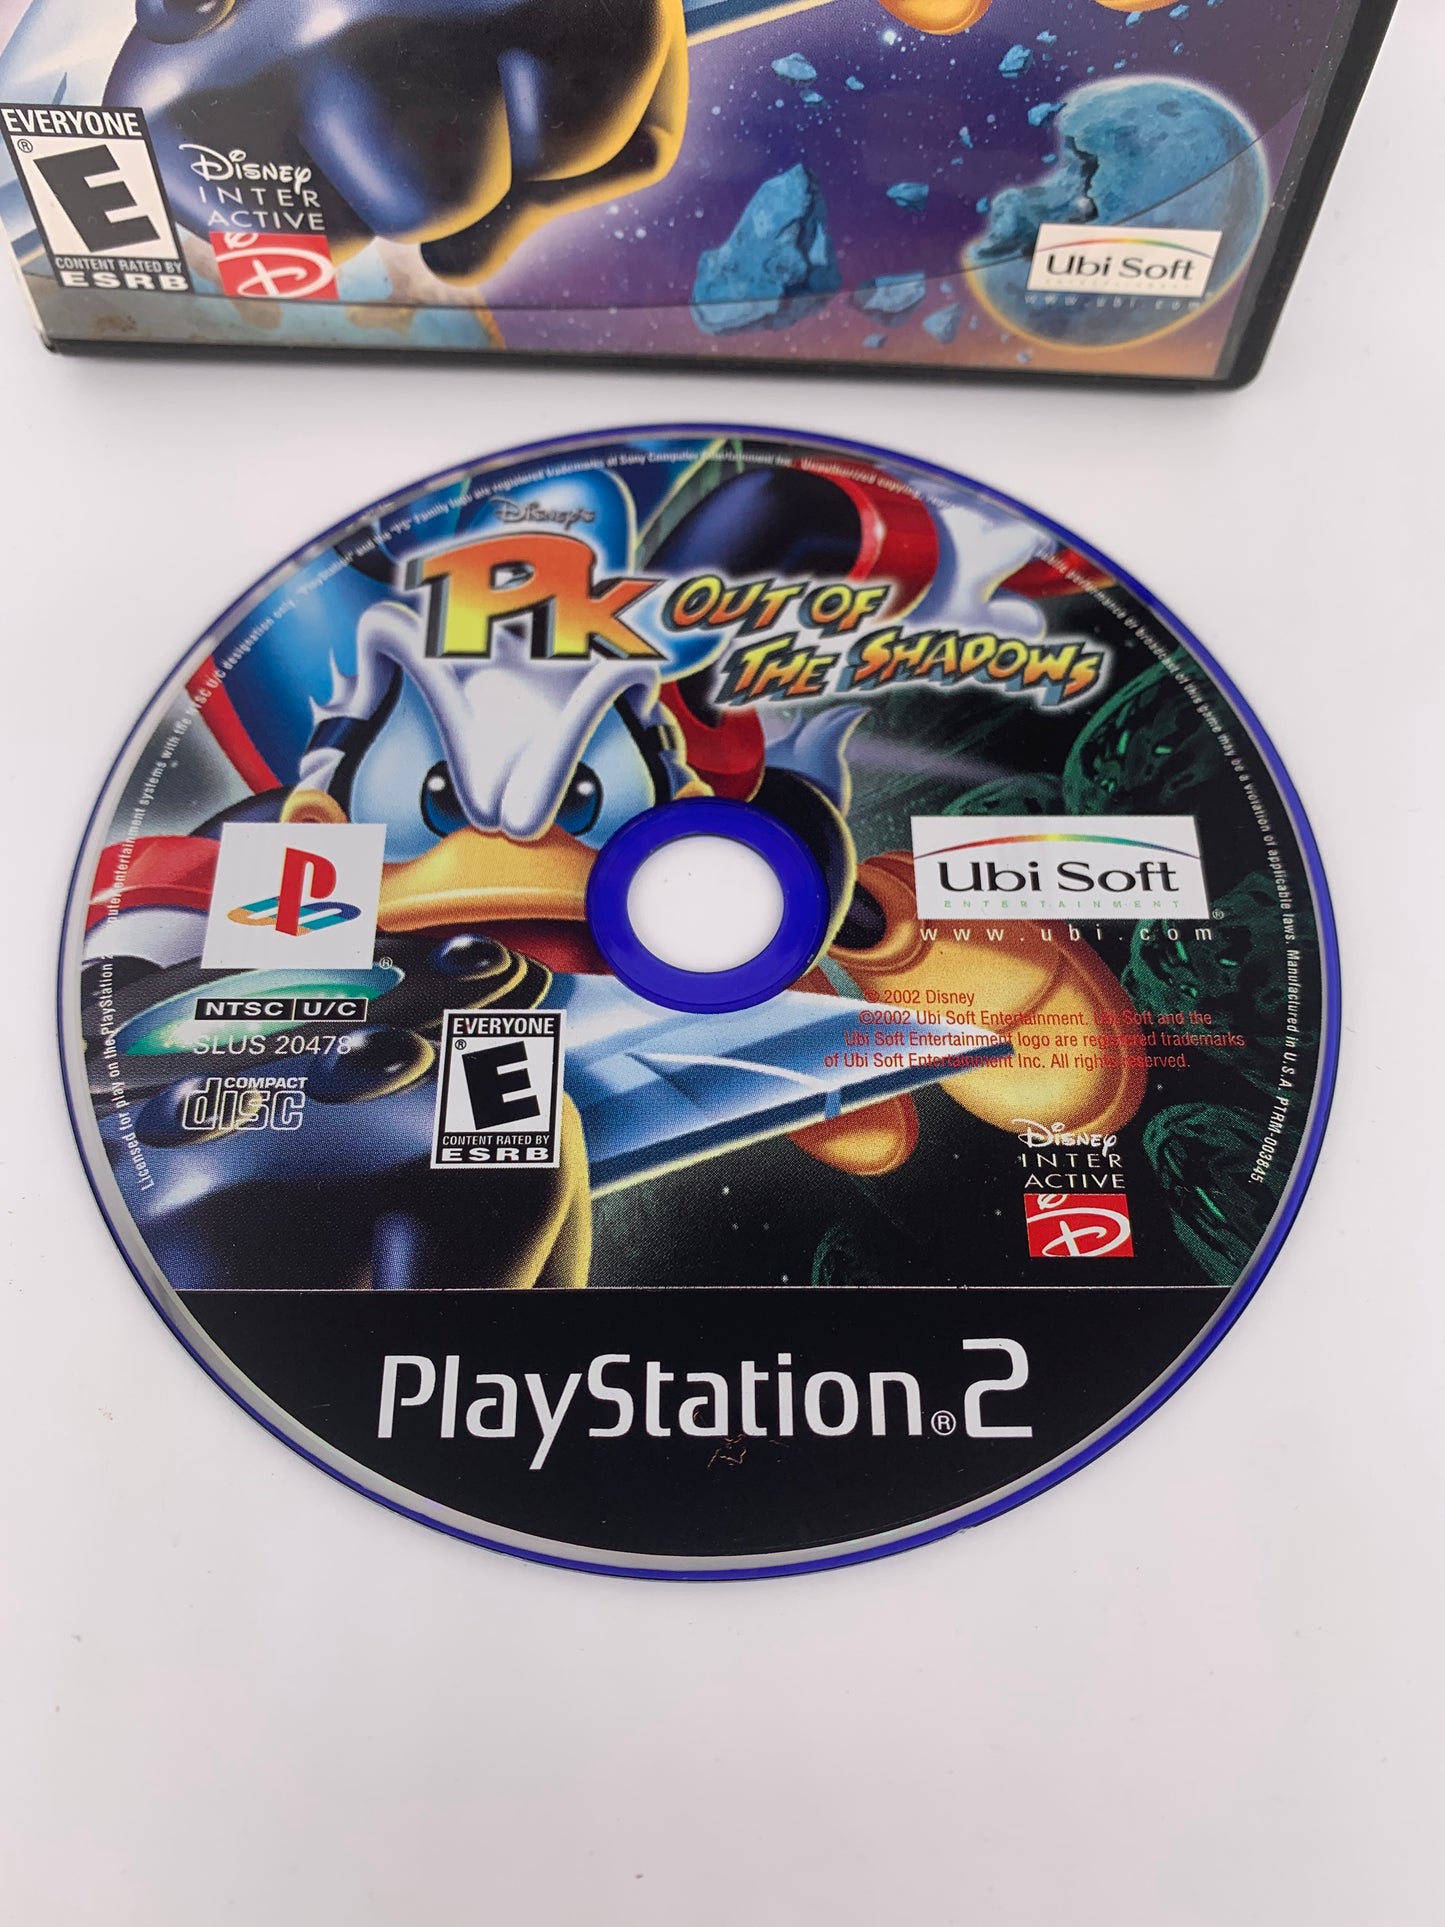 SONY PLAYSTATiON 2 [PS2] | DiSNEYS PK OUT OF THE SHADOWS